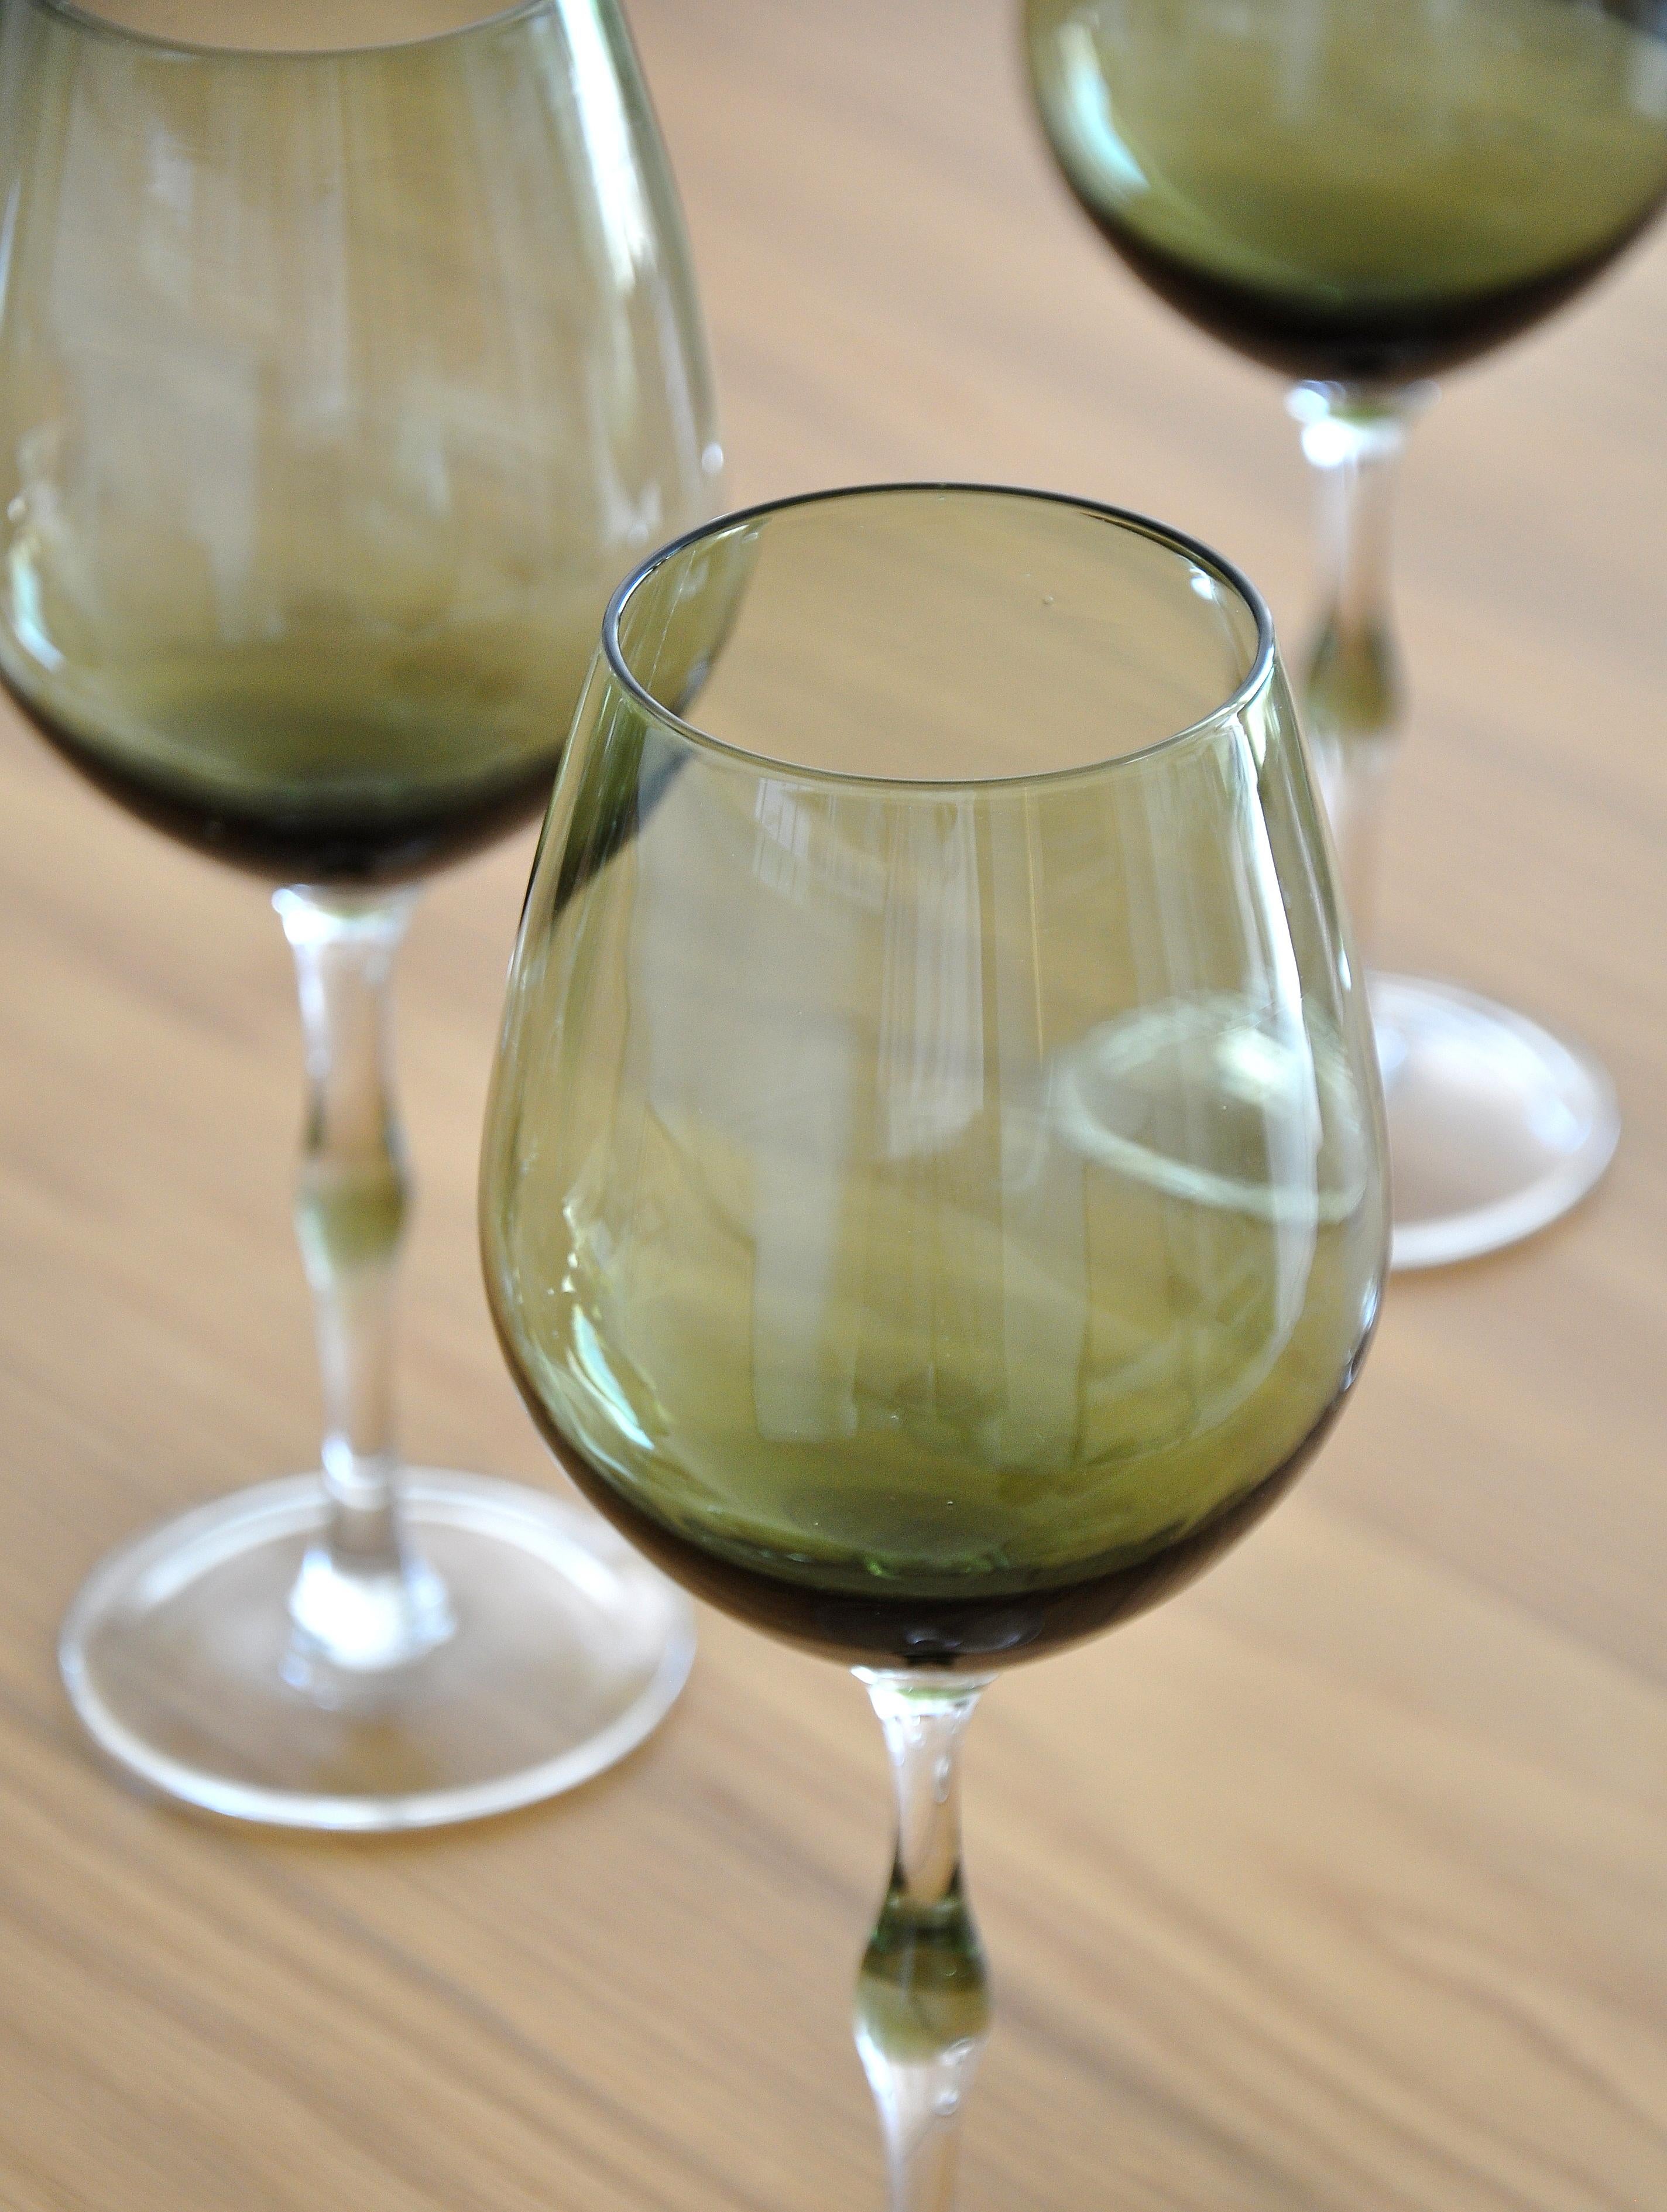 Lovely set of 6 vintage Italian smoky green wine goblets featuring faux bamboo style stems. As elegant and decorative as they are a pleasure to hold in the hand, this hand-blown stemware is just waiting to be enjoyed with your favorite wine and